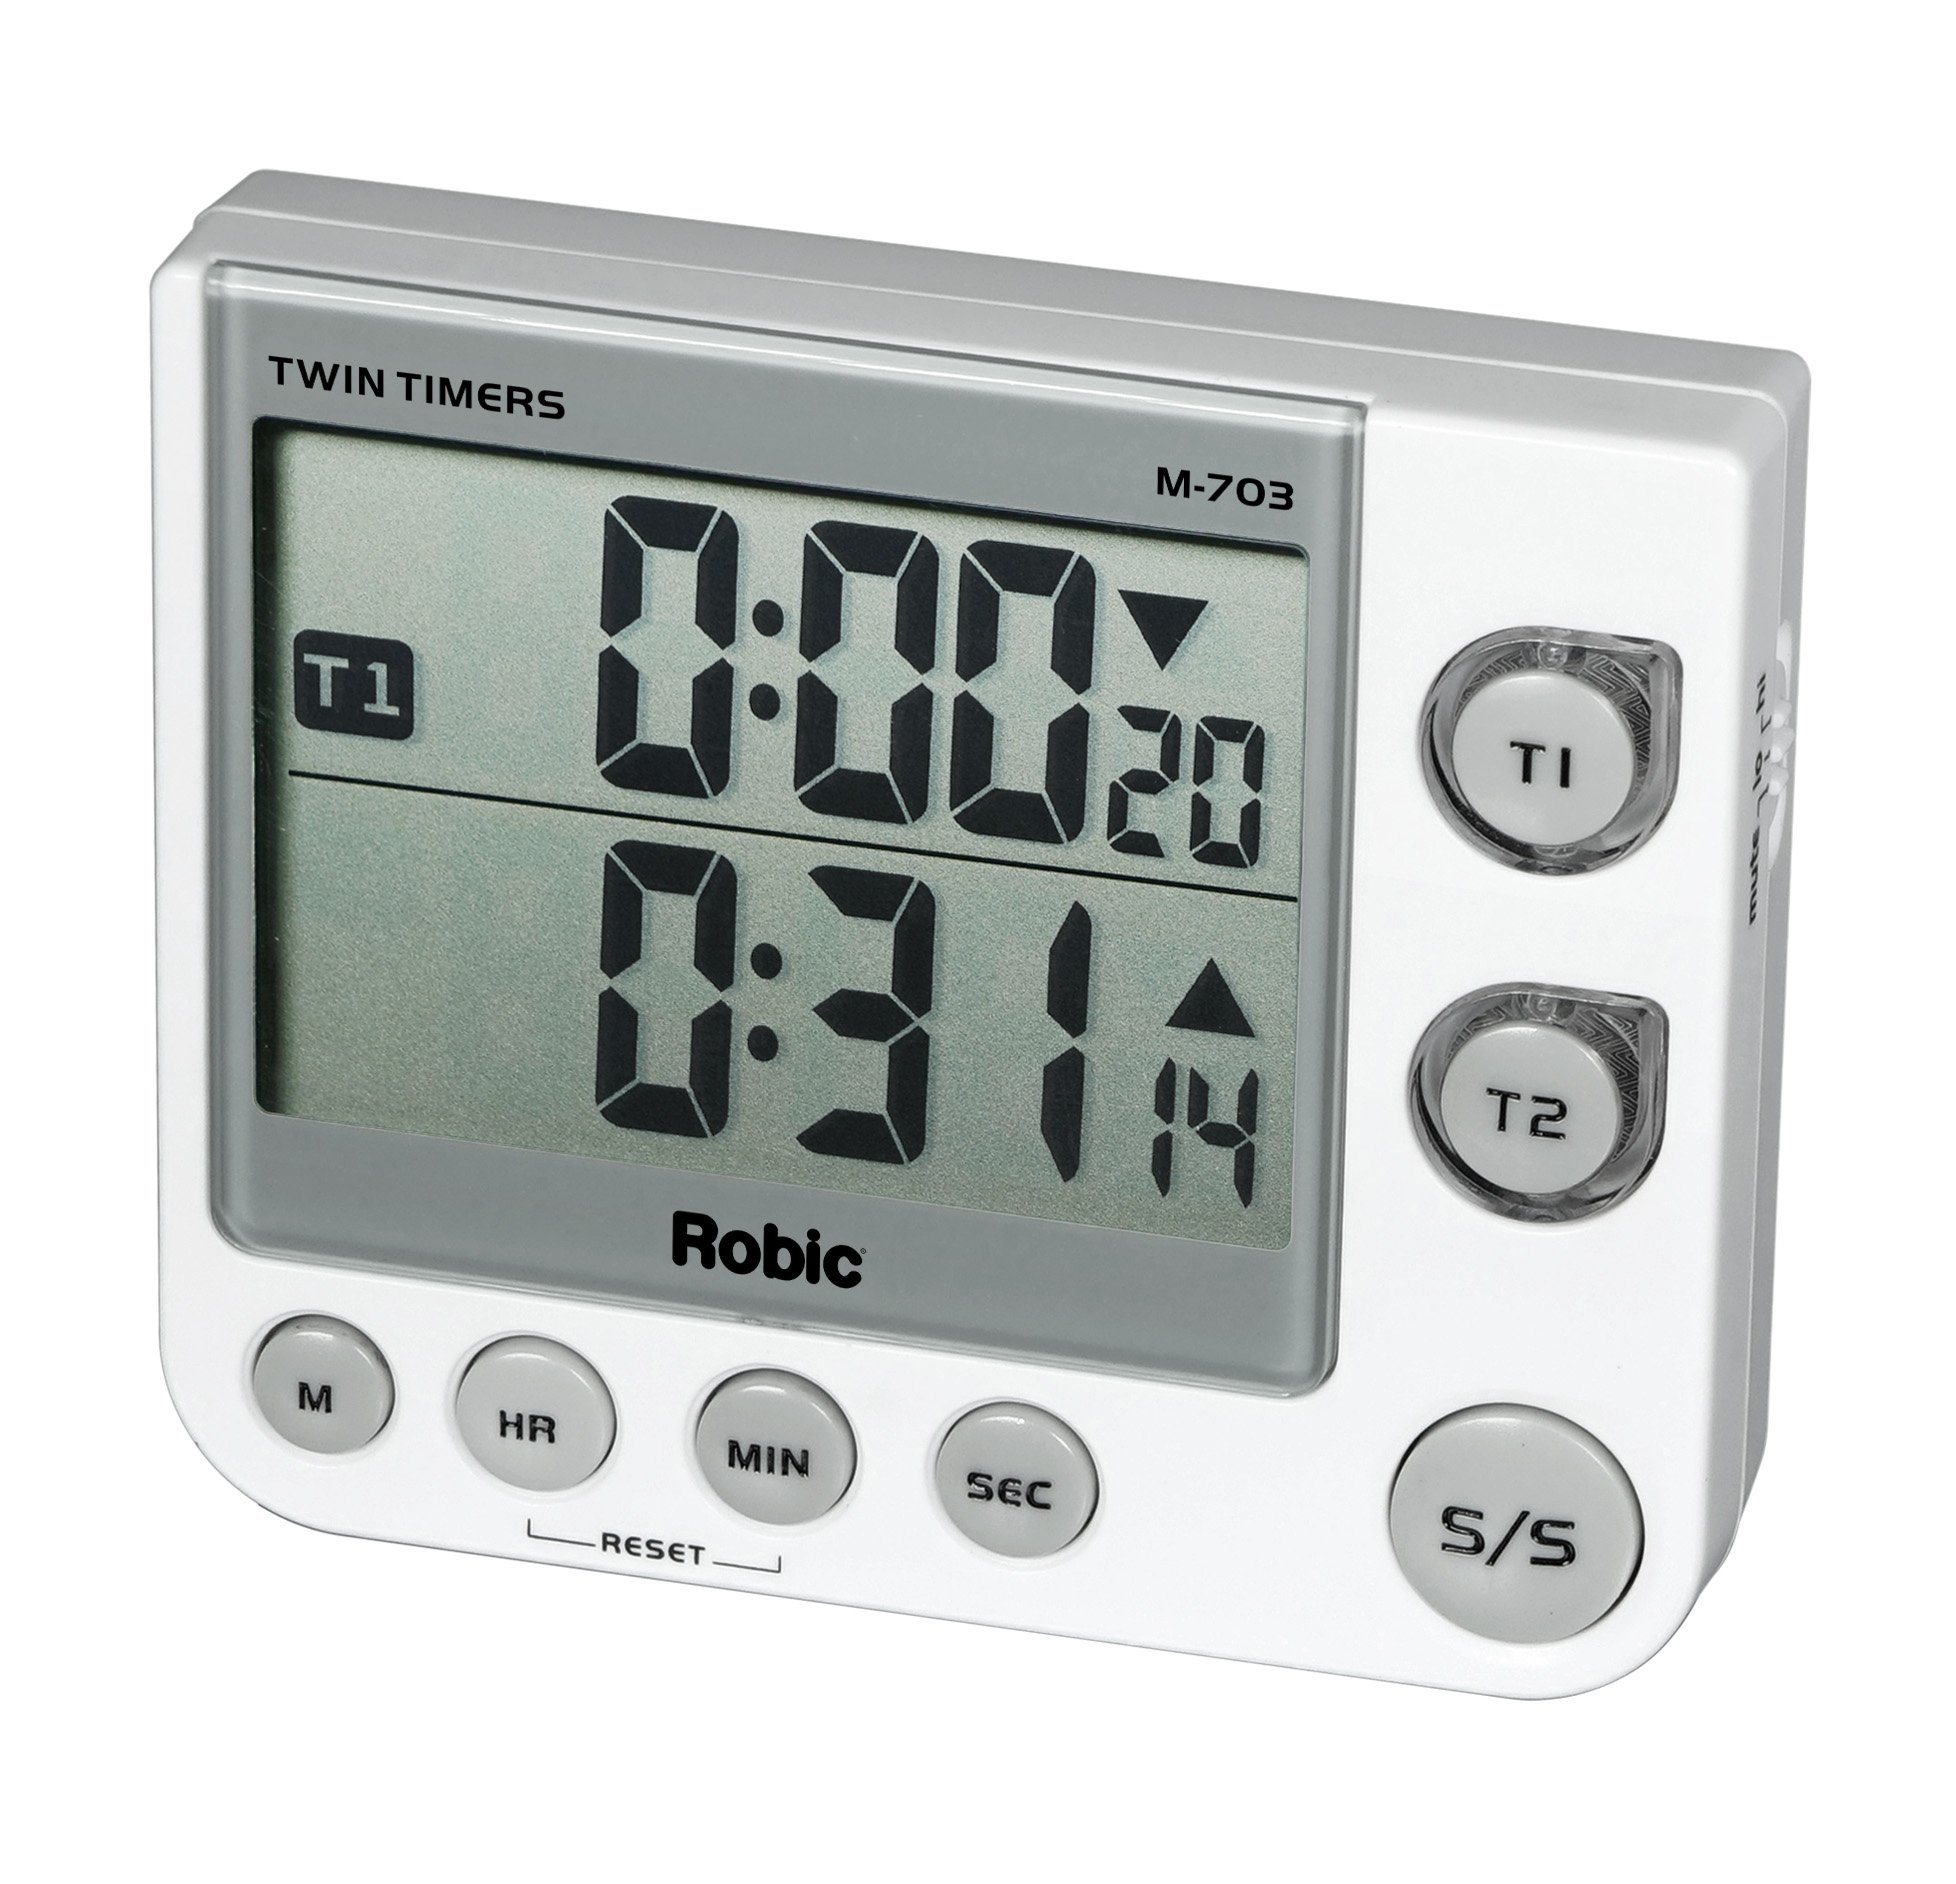 Robic M-703 Twin Timers; Countdown, Countup Game and Activity Timer; Flashing LED confirms Activity, Silent, Medium or Extra Loud Alarm at Completion…America's Timer, White, One Size